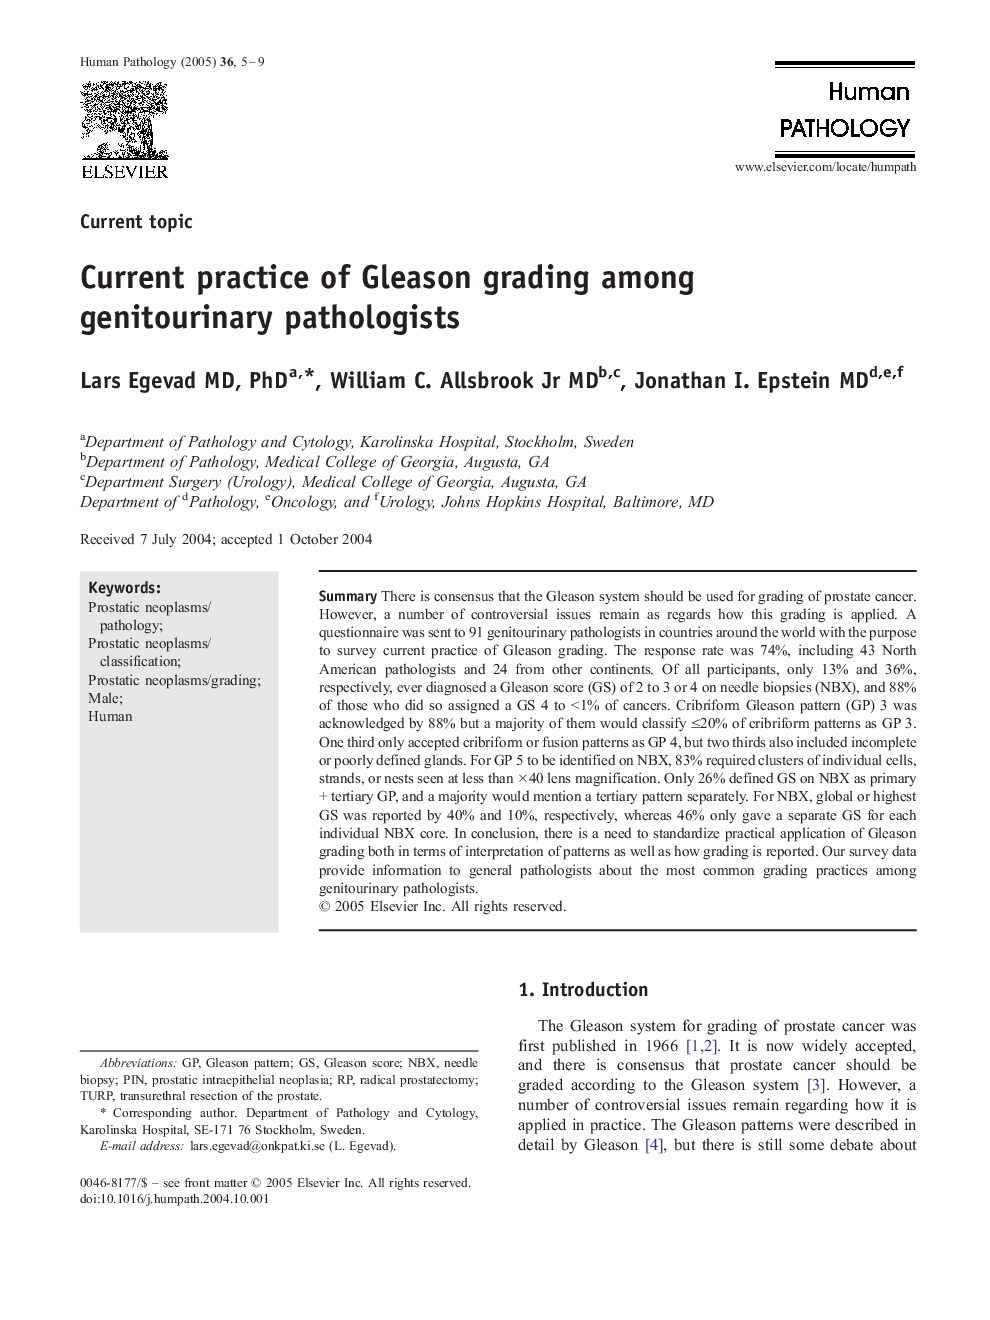 Current practice of Gleason grading among genitourinary pathologists